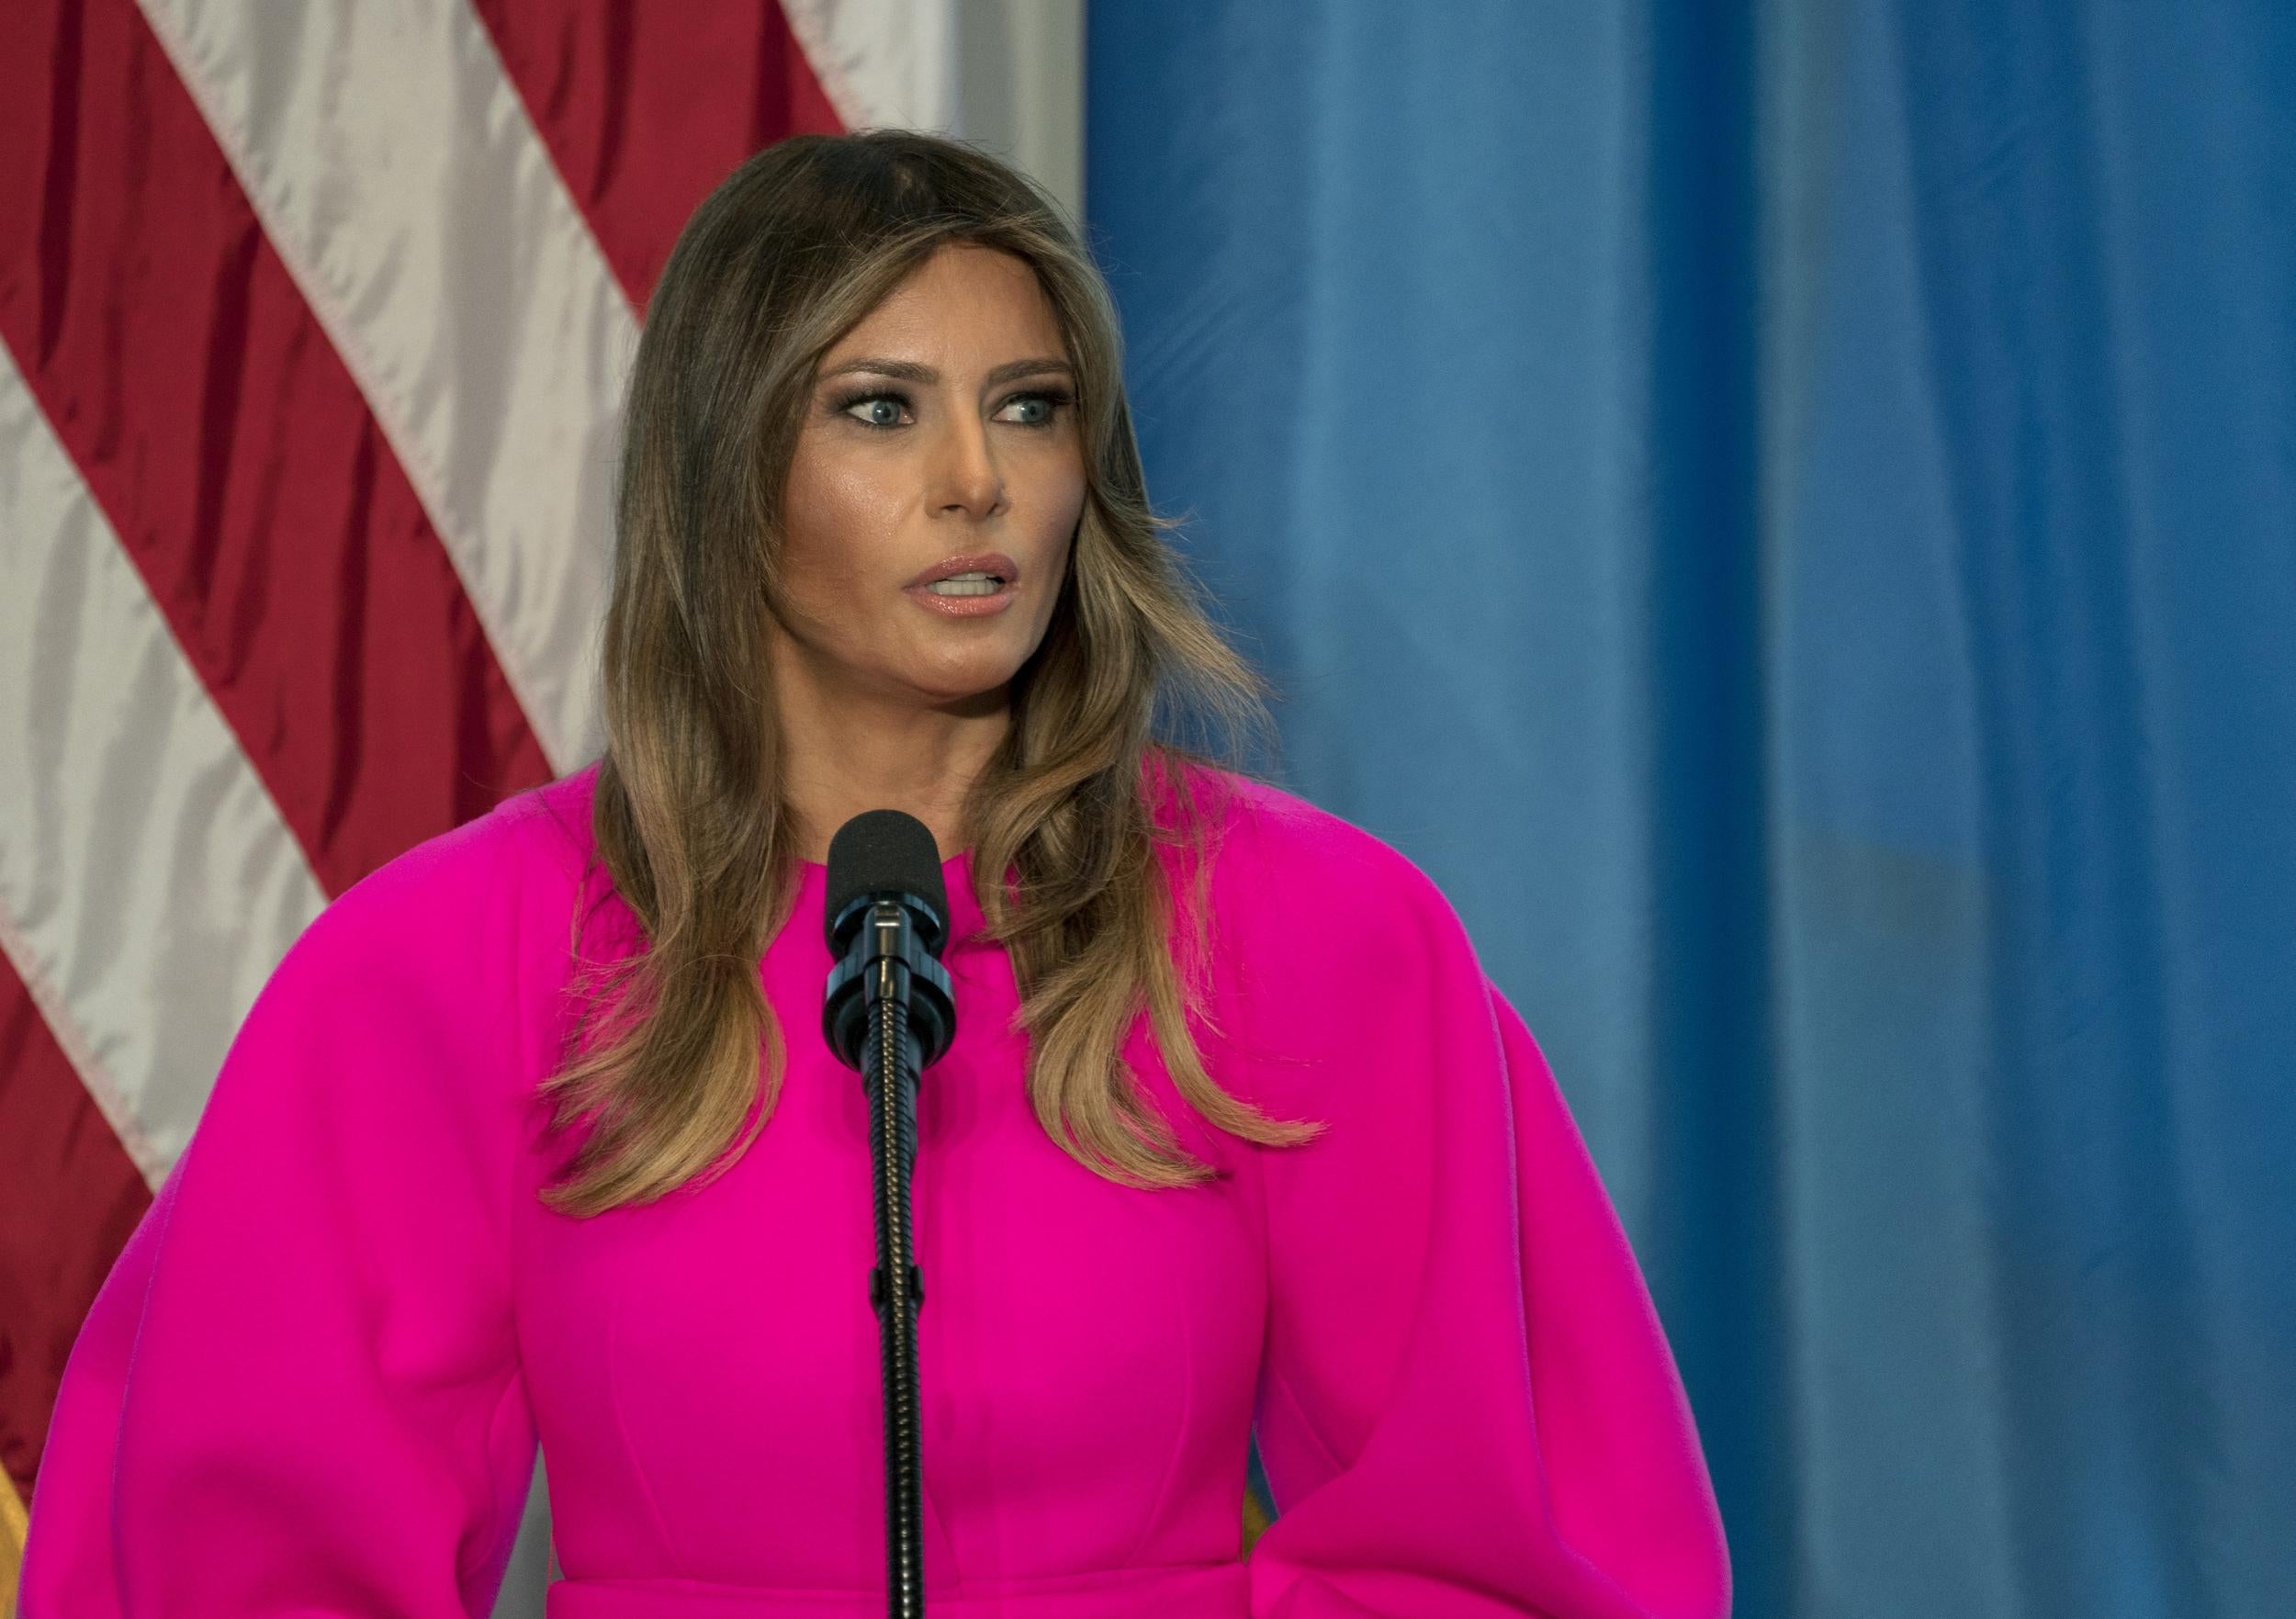 First lady Melania Trump addressed the UN about bullying in September